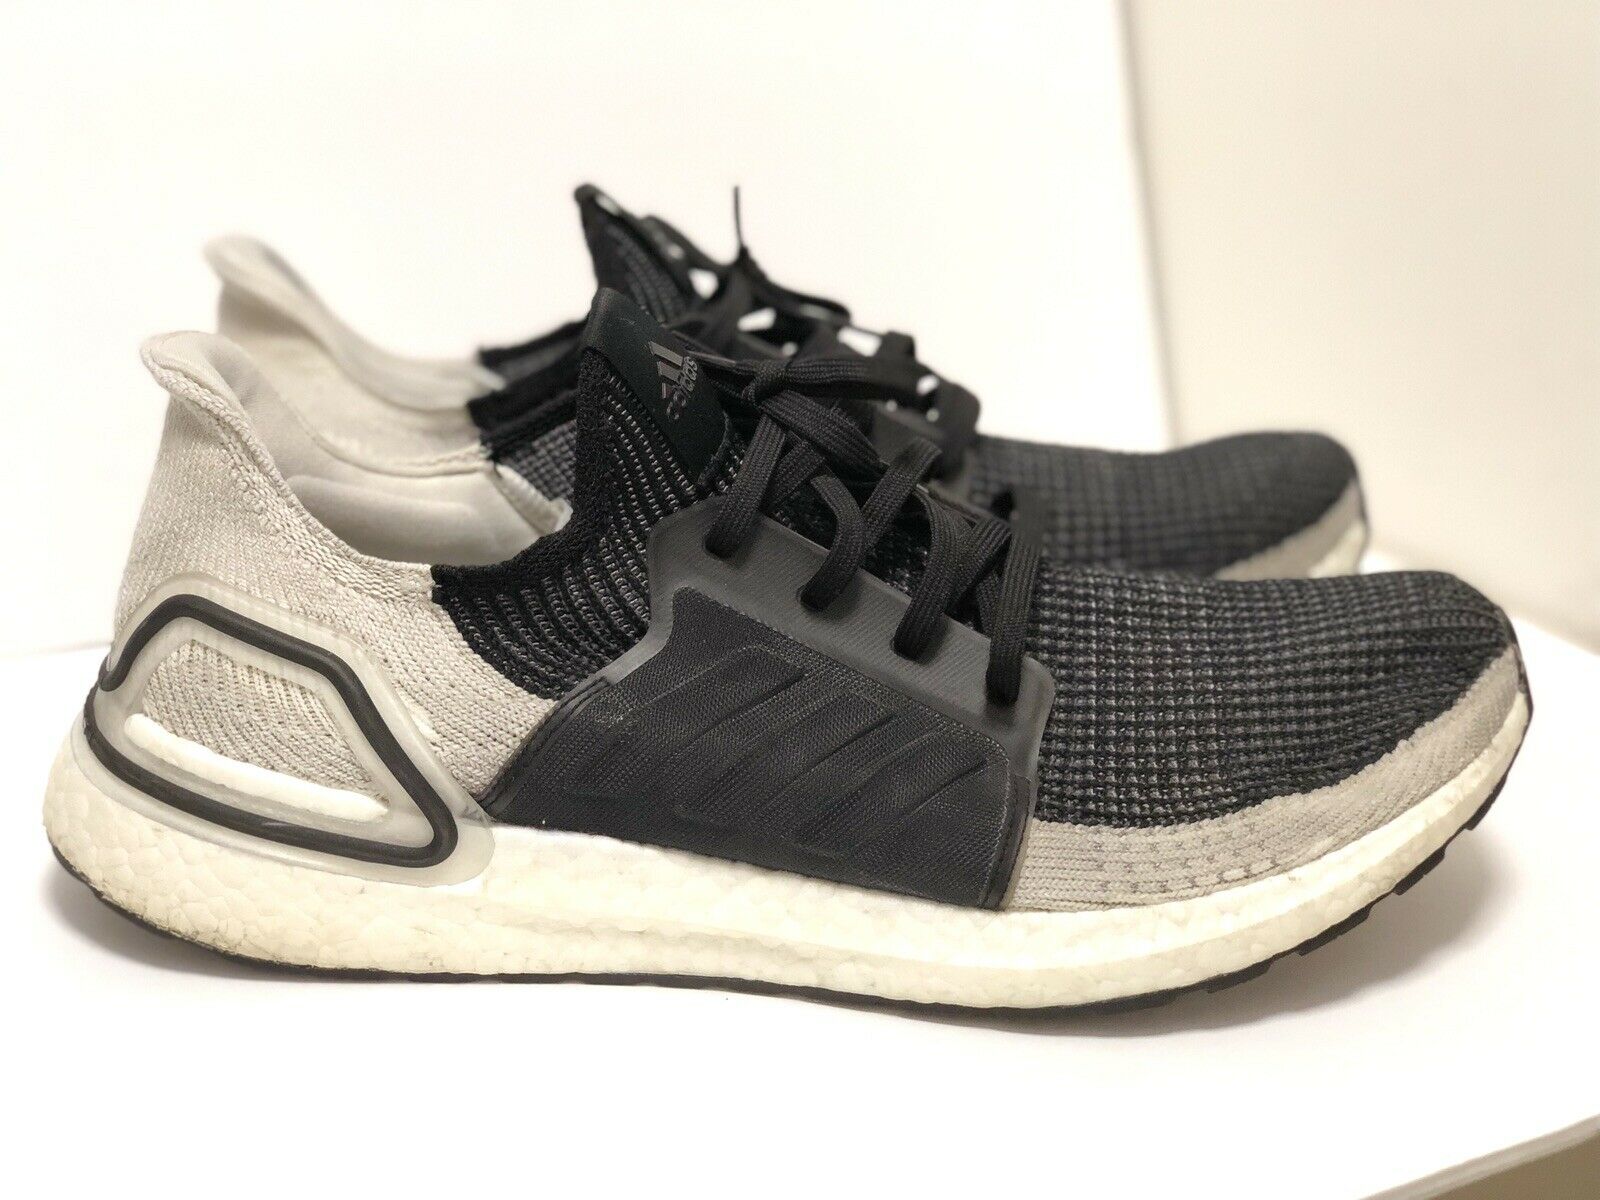 Adidas Ultraboost 2019 Oreo Black and White Running Shoes Size 14 (no Insoles)